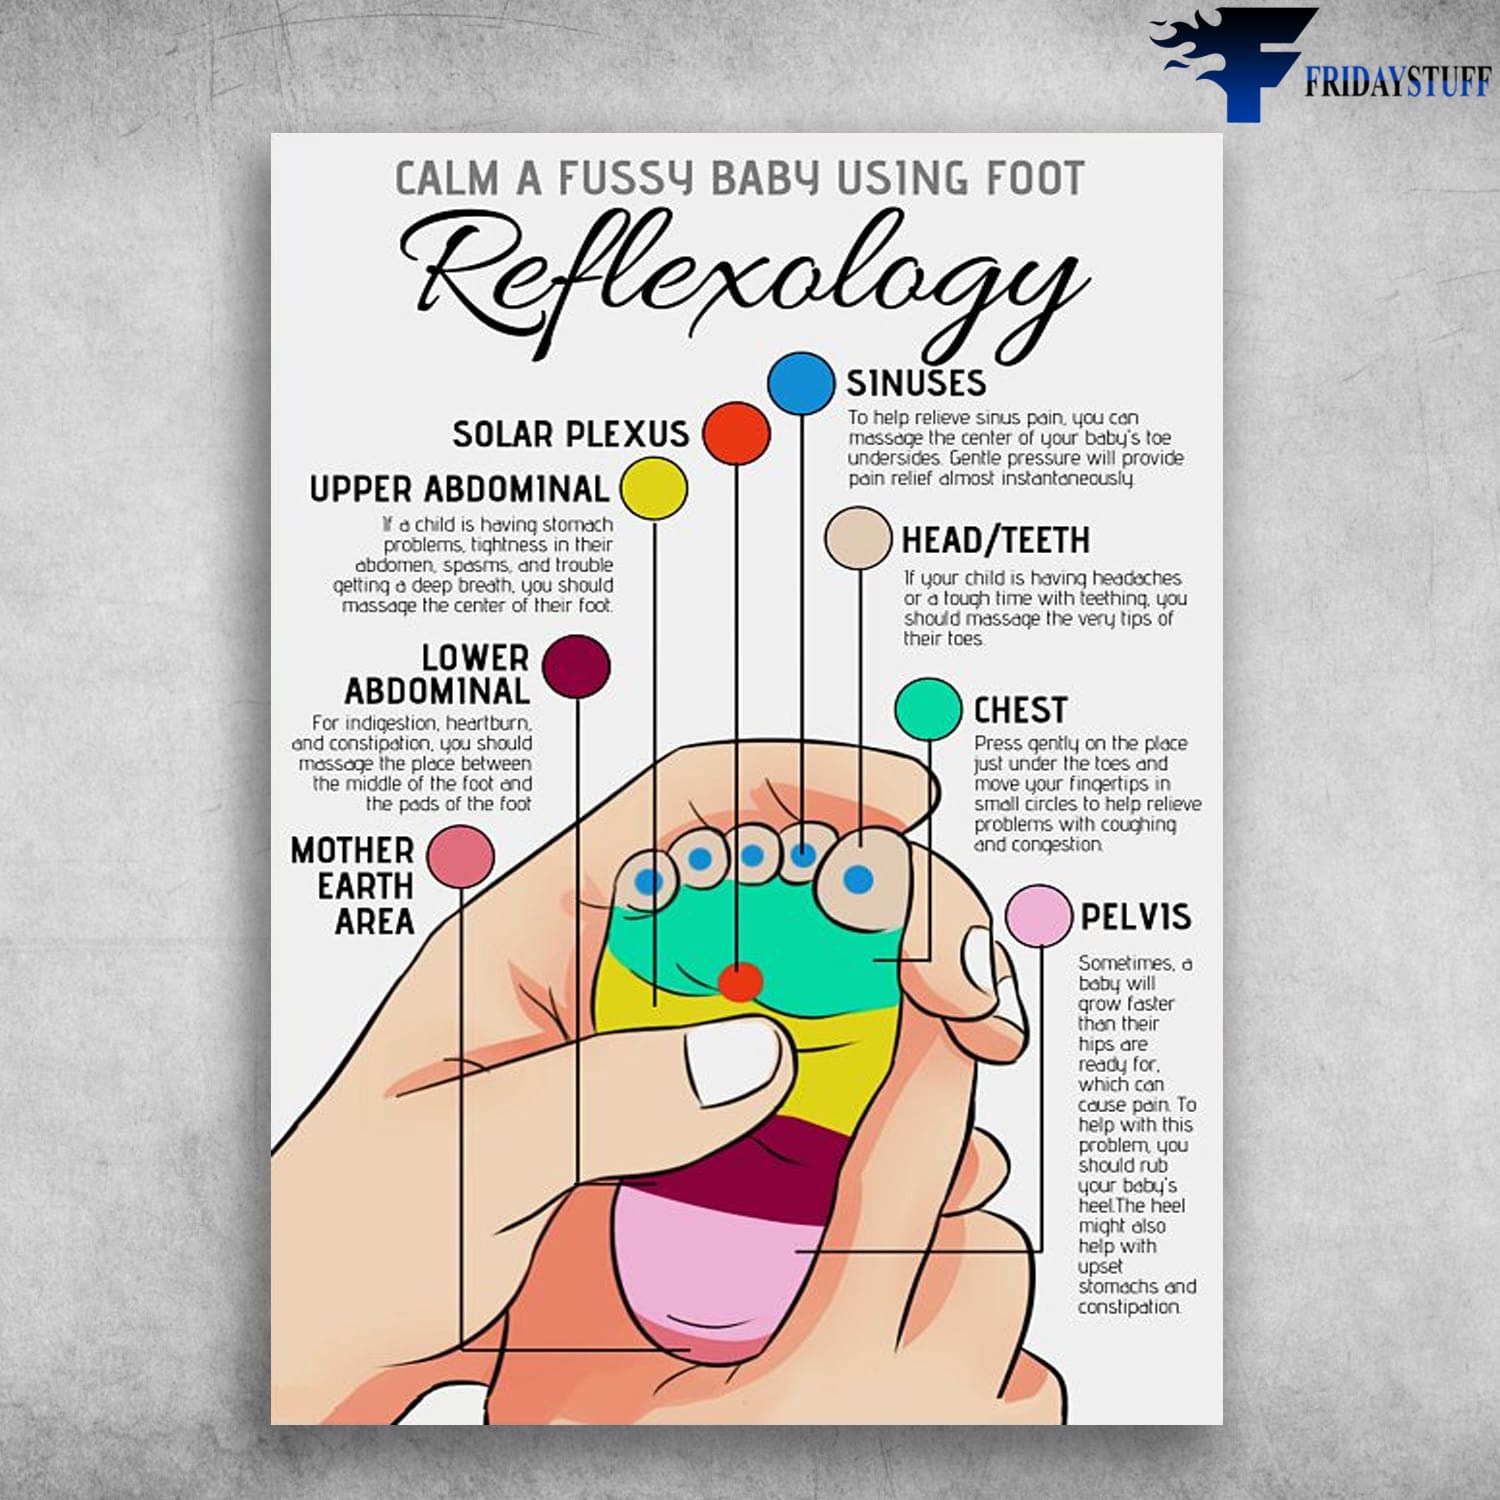 Calm A Fussy Baby Using Foot, Reflexology Poster, Solar Plexus, Upper Abdominal, Lower Abdominal, Mother Earth Area